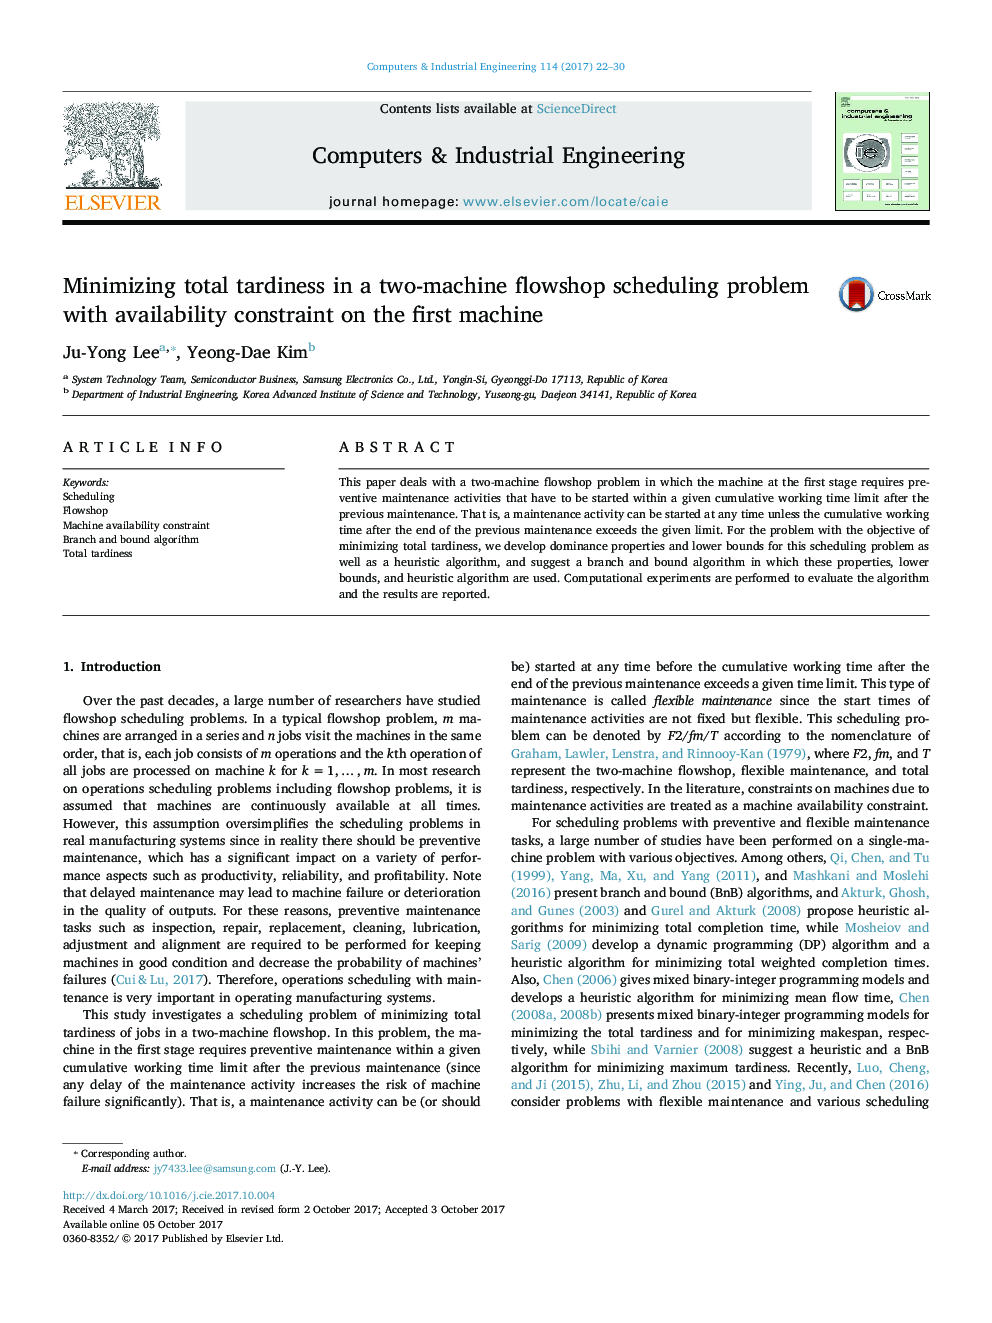 Minimizing total tardiness in a two-machine flowshop scheduling problem with availability constraint on the first machine